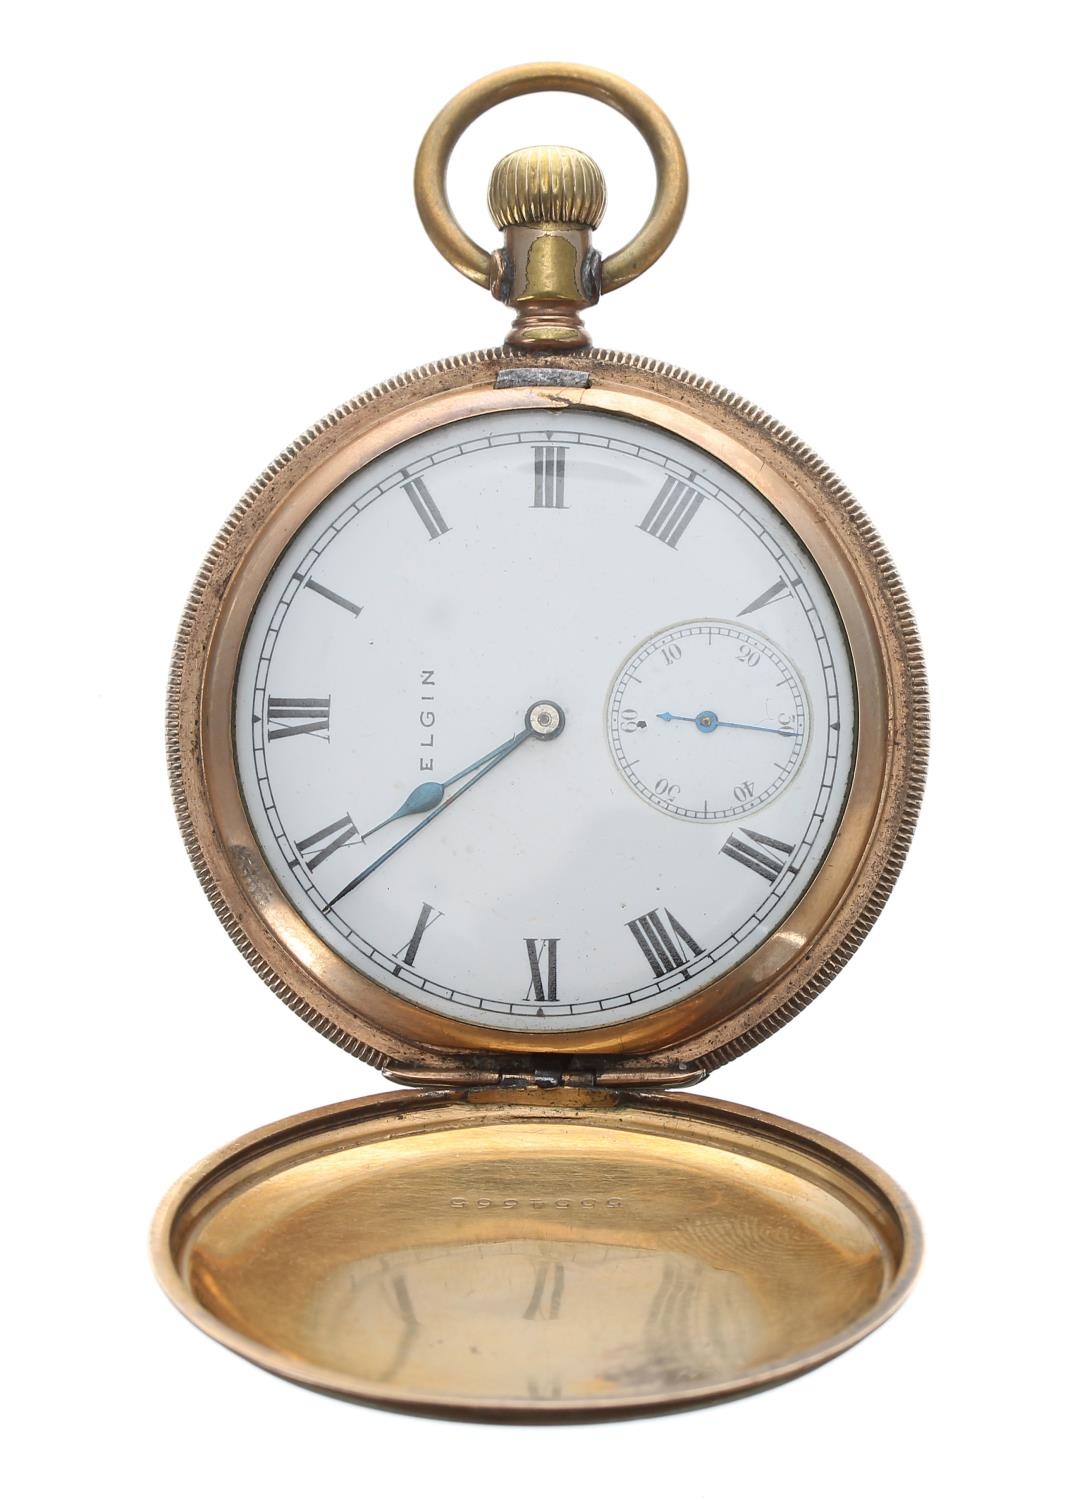 Elgin gold plated lever hunter pocket watch, circa 1909, signed gilt frosted 7 jewel movement with